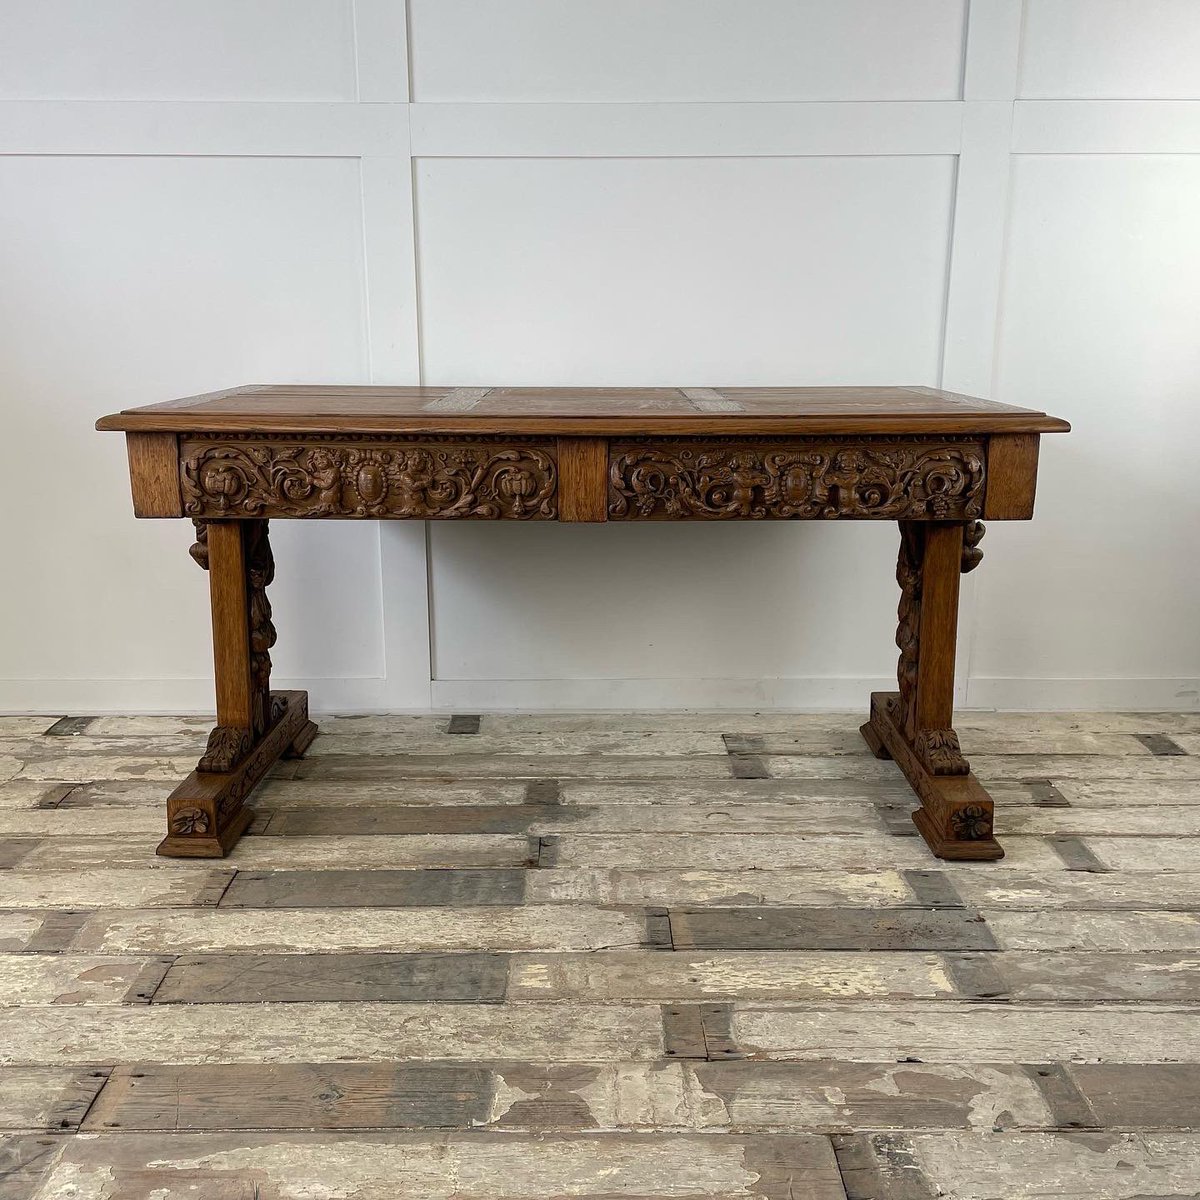 This lovely 19th C. Carved Oak Hall Table is just one of fresh stock pieces added to our website today.
theoldyard.co.uk #decorativeantiques #decorativefurniture #interiordesign #interiorstyling #countryhouseantiques